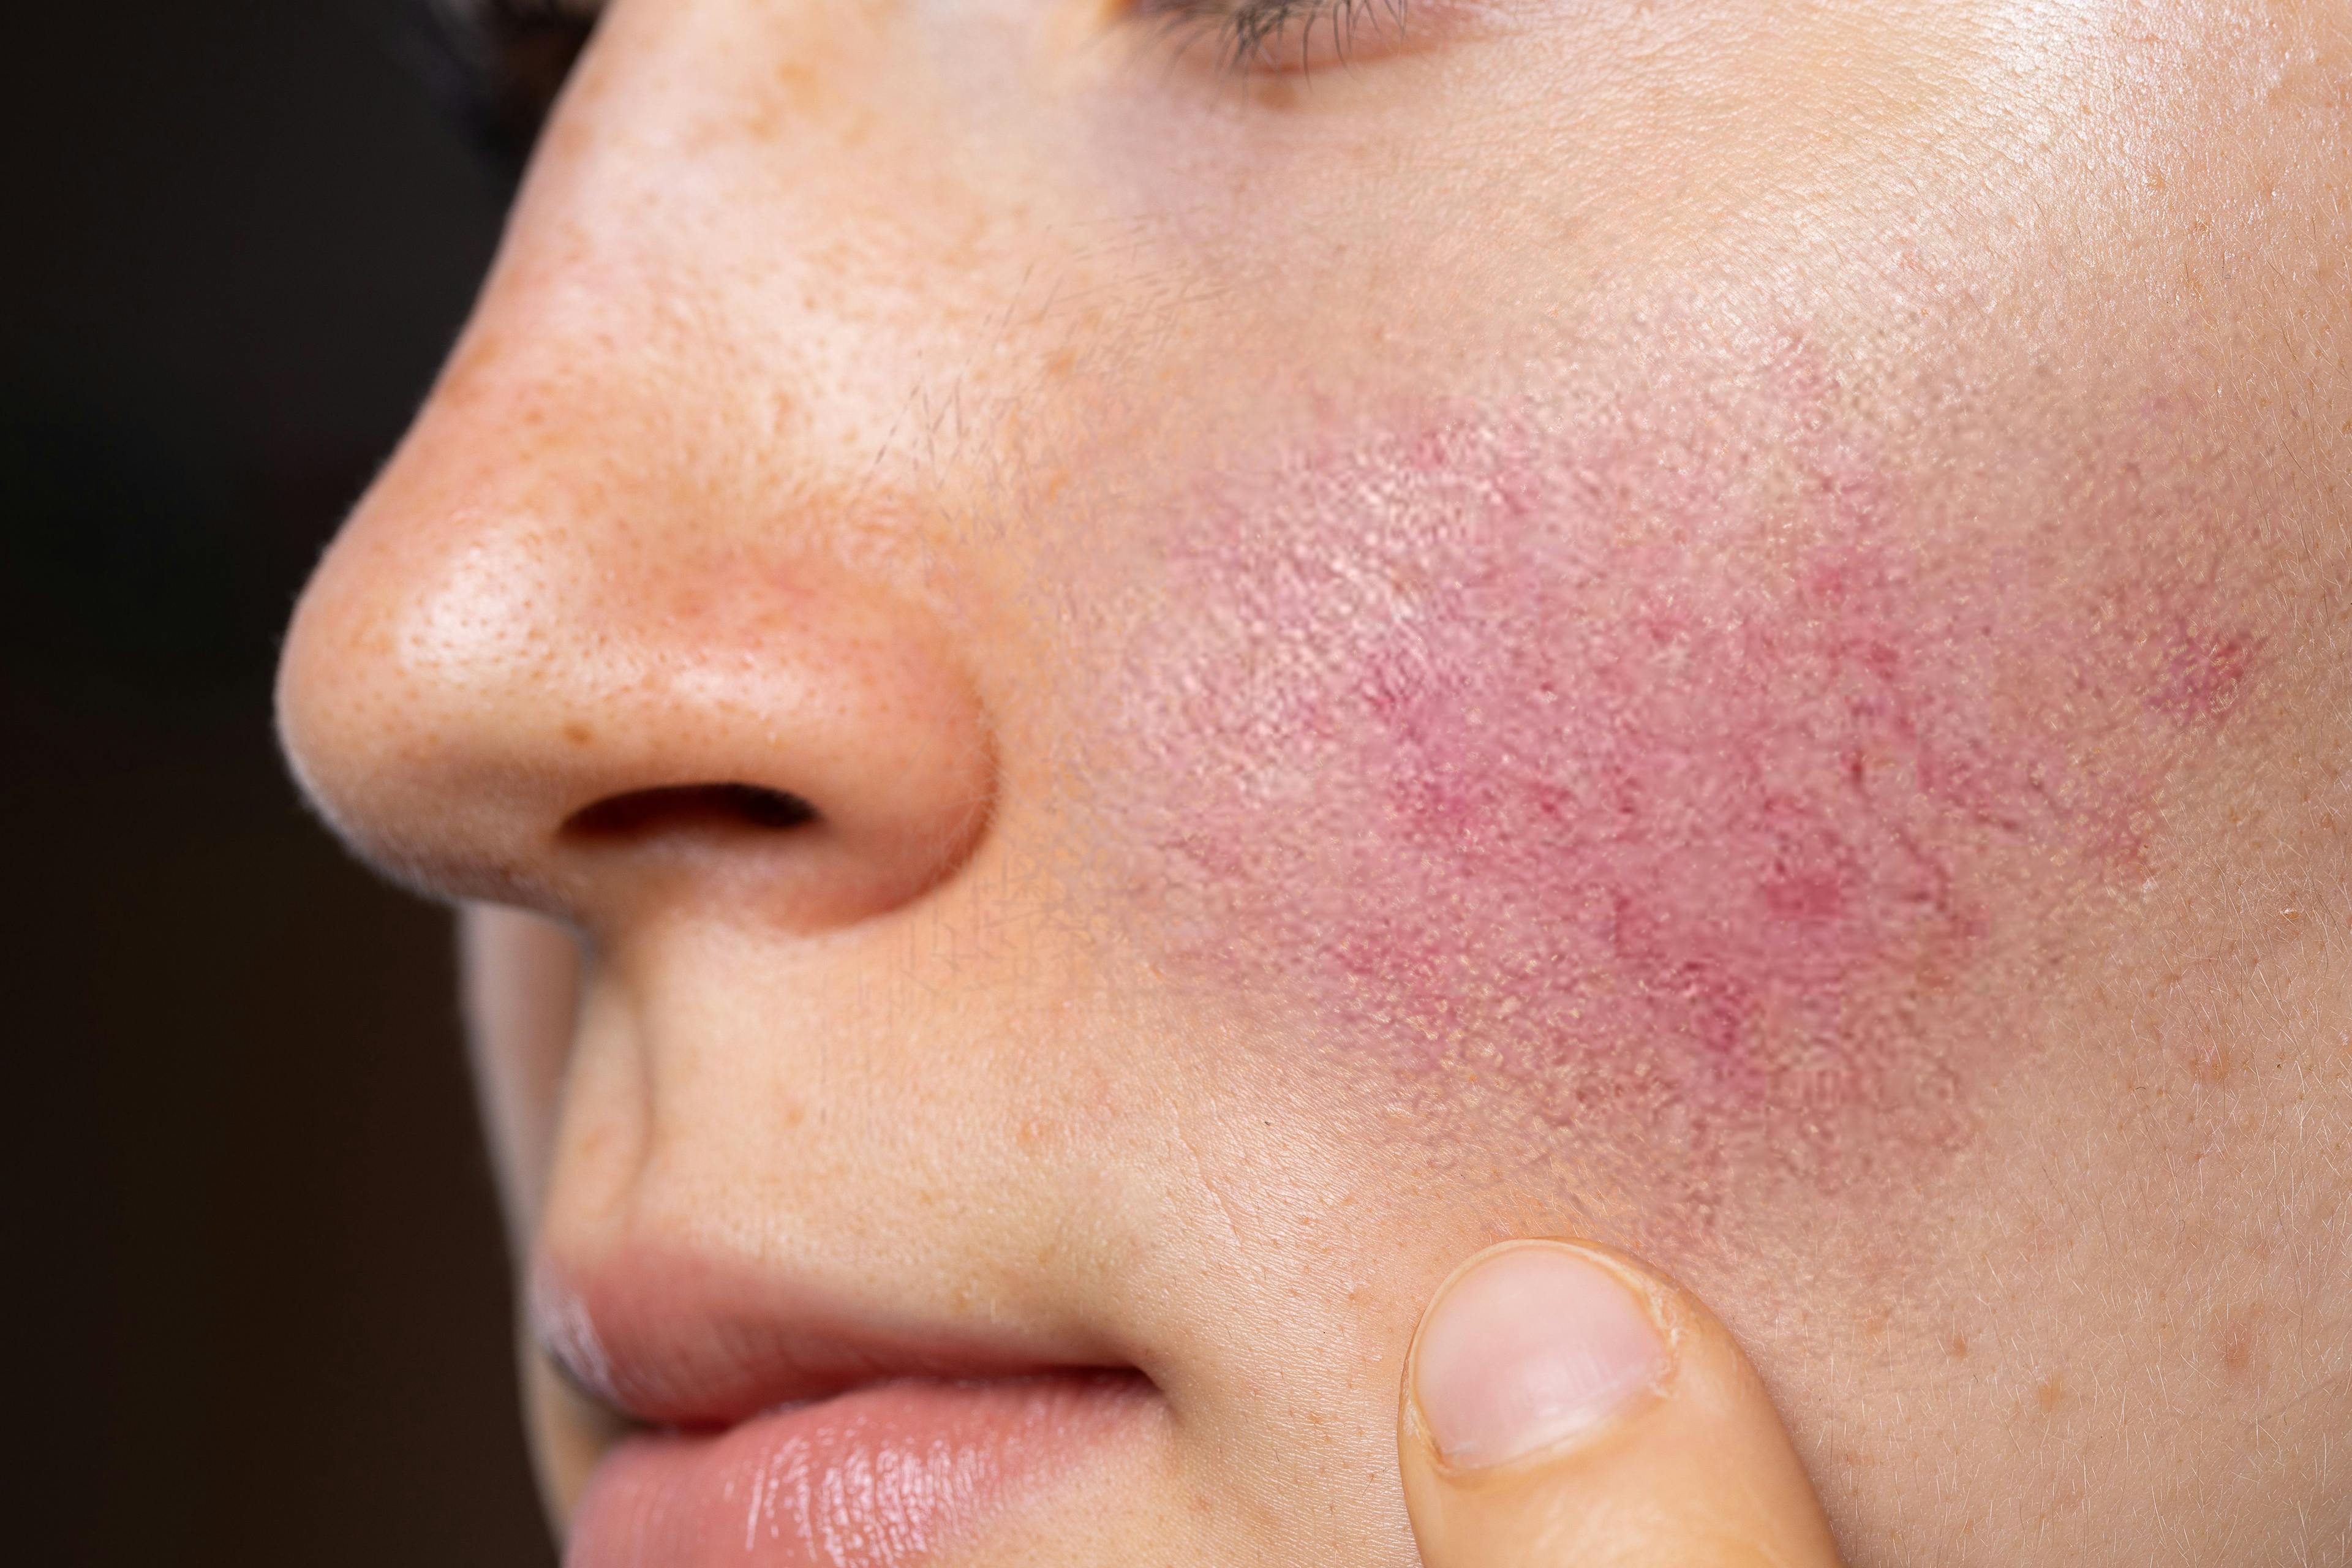 QUIZ RECAP: Test Your Knowledge of Rosacea Etiology, Types, and Triggers